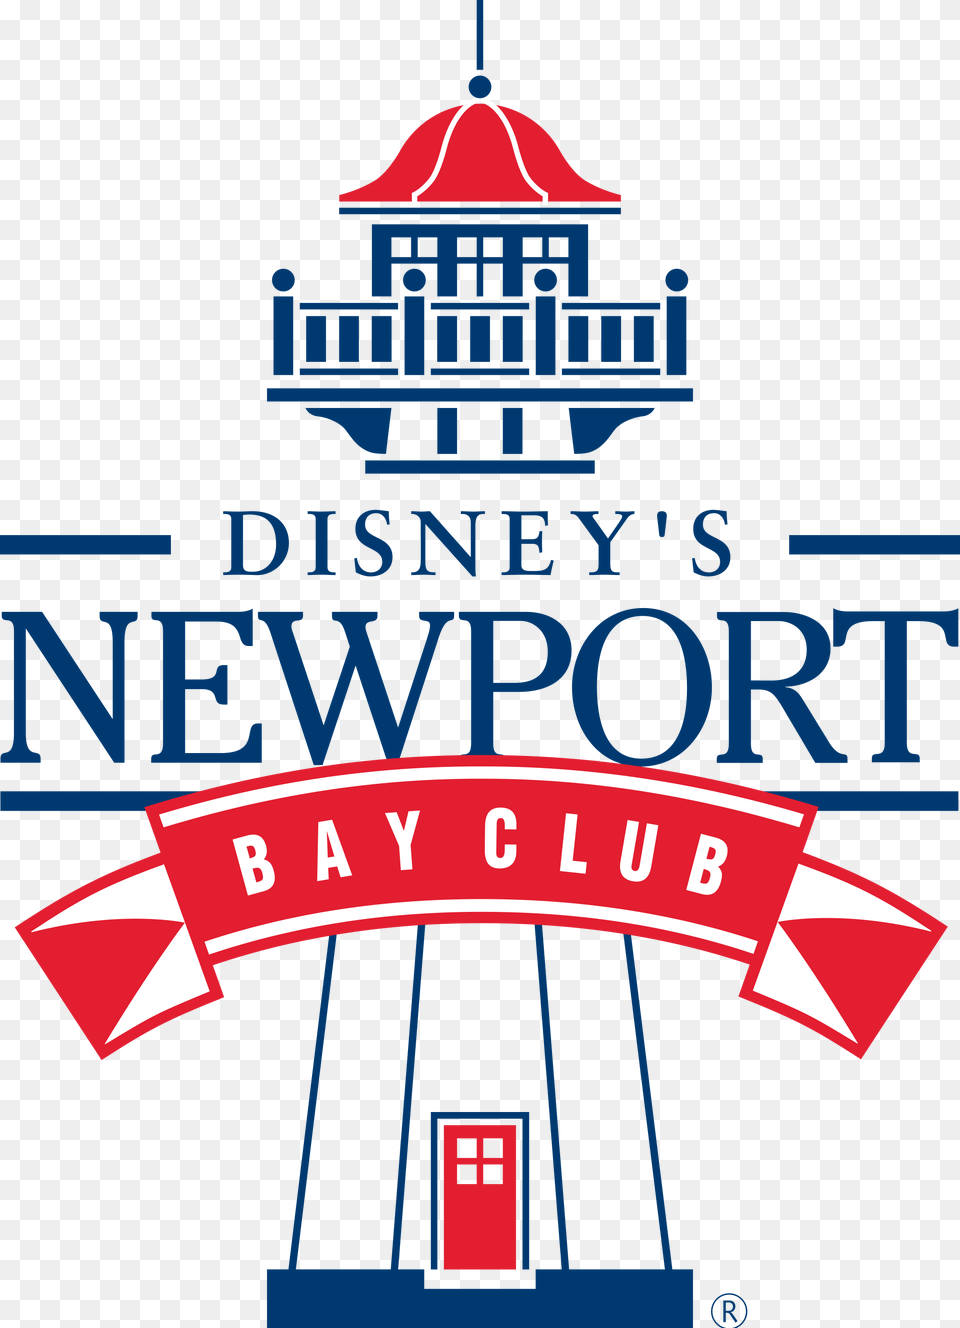 Newport Bay Club Hotel Hotel Newport Bay Club Logo, Advertisement, Poster Png